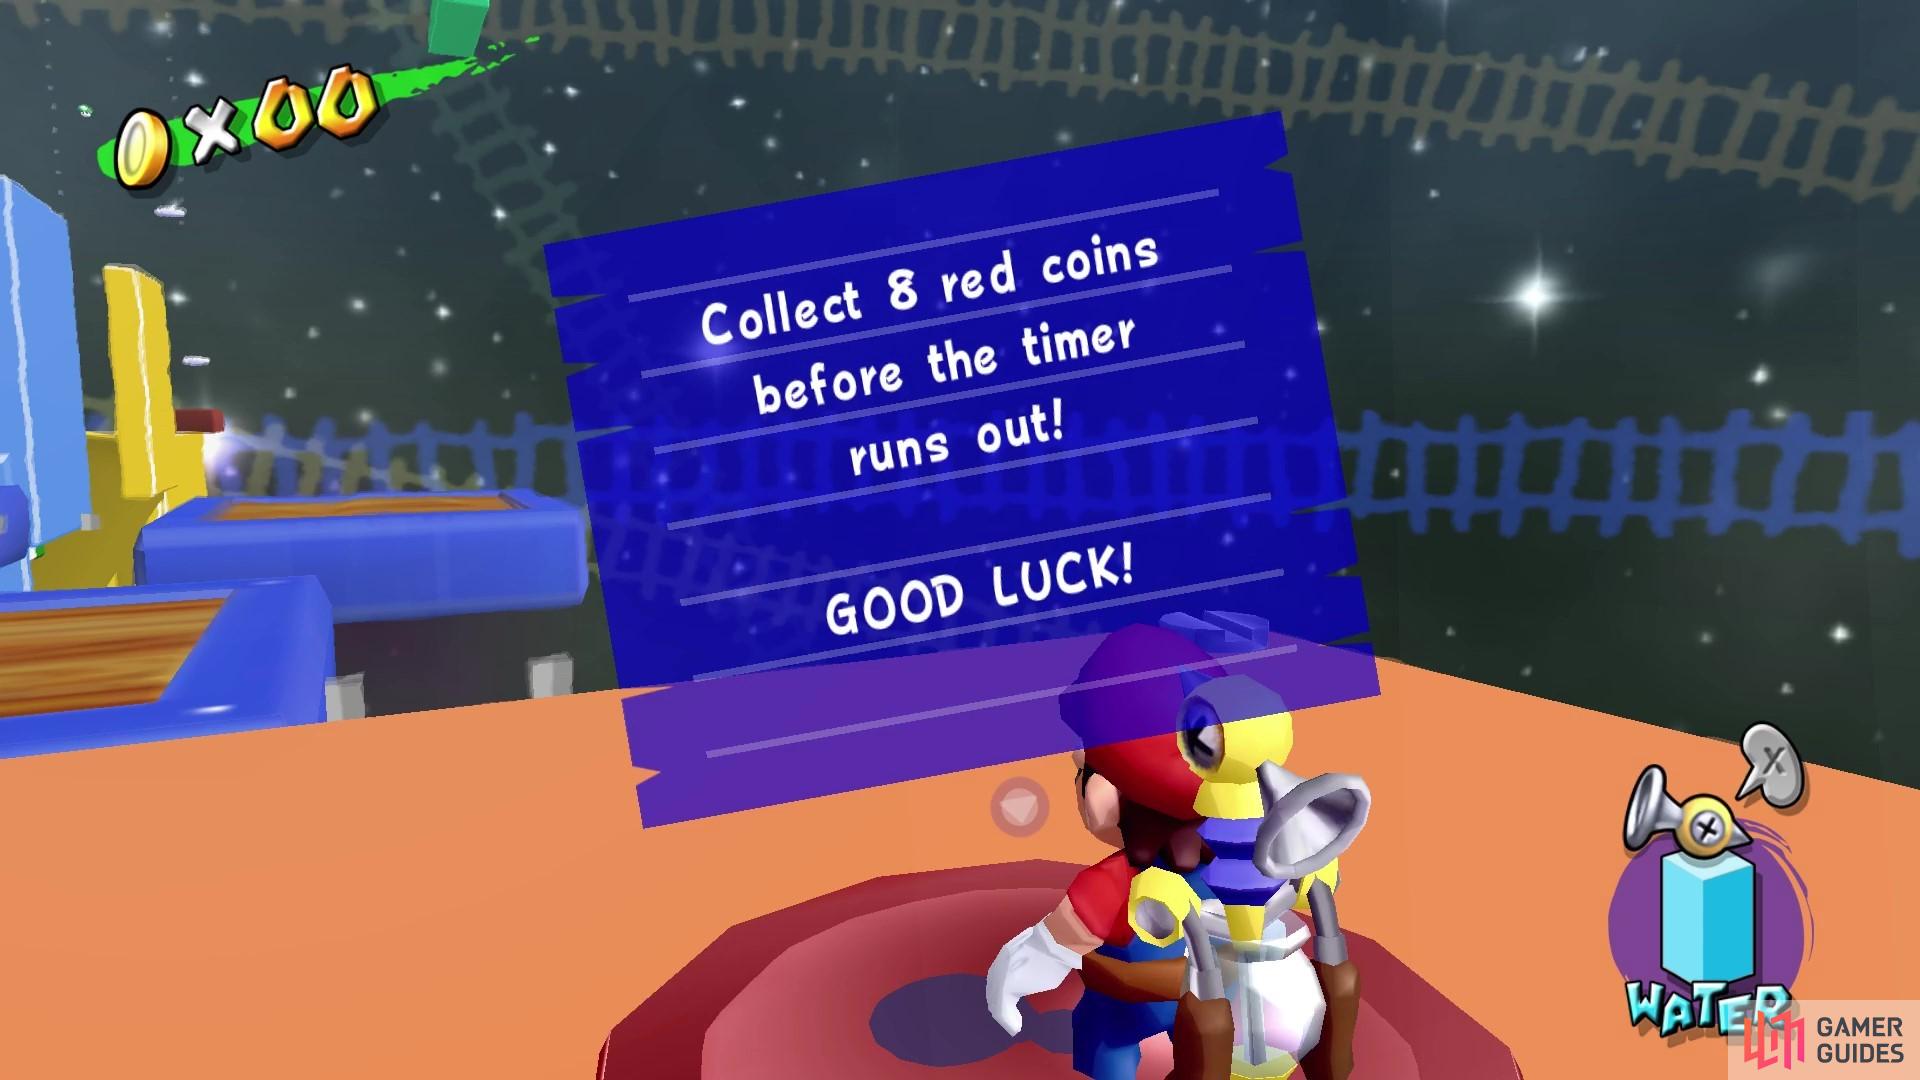 You’ll have a minute and a half to collect all 8 red coins in this area.